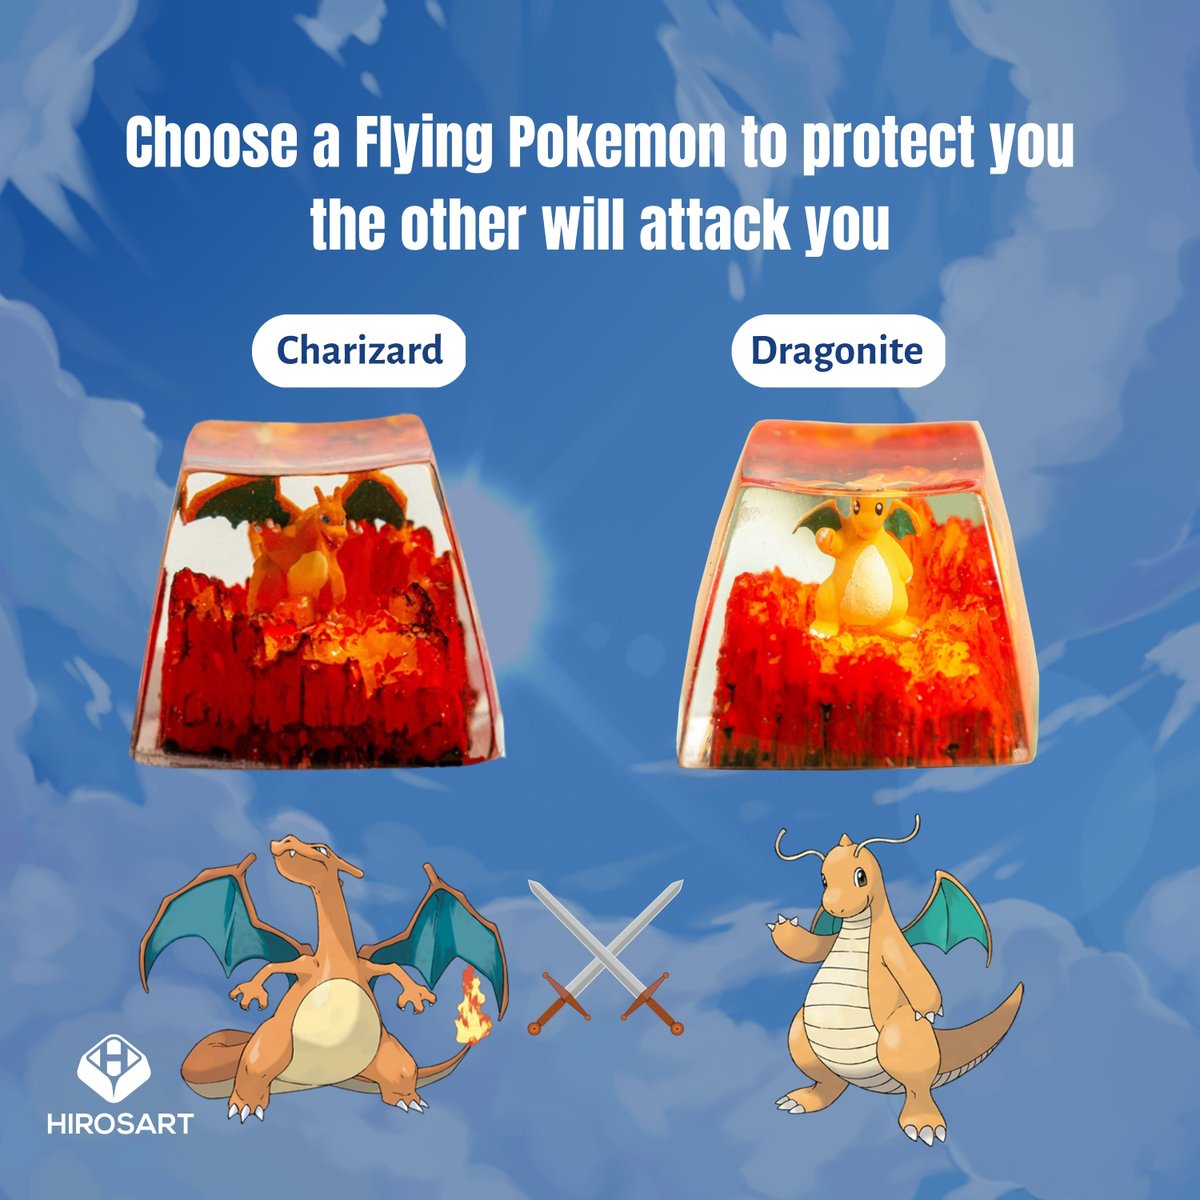 Who would you pick to protect you? Charizard or Dragonite. Comment below ⏬

---- 
#hirosart #handmade #resinart  #resin #pcsetup #cutesetup #keebs #gamers #resincrafts #gaming  #gamergirls #diy #pcgamers  #videogame   #Pokemonfans #Pokemoncommunity #Charizard #Dragonite